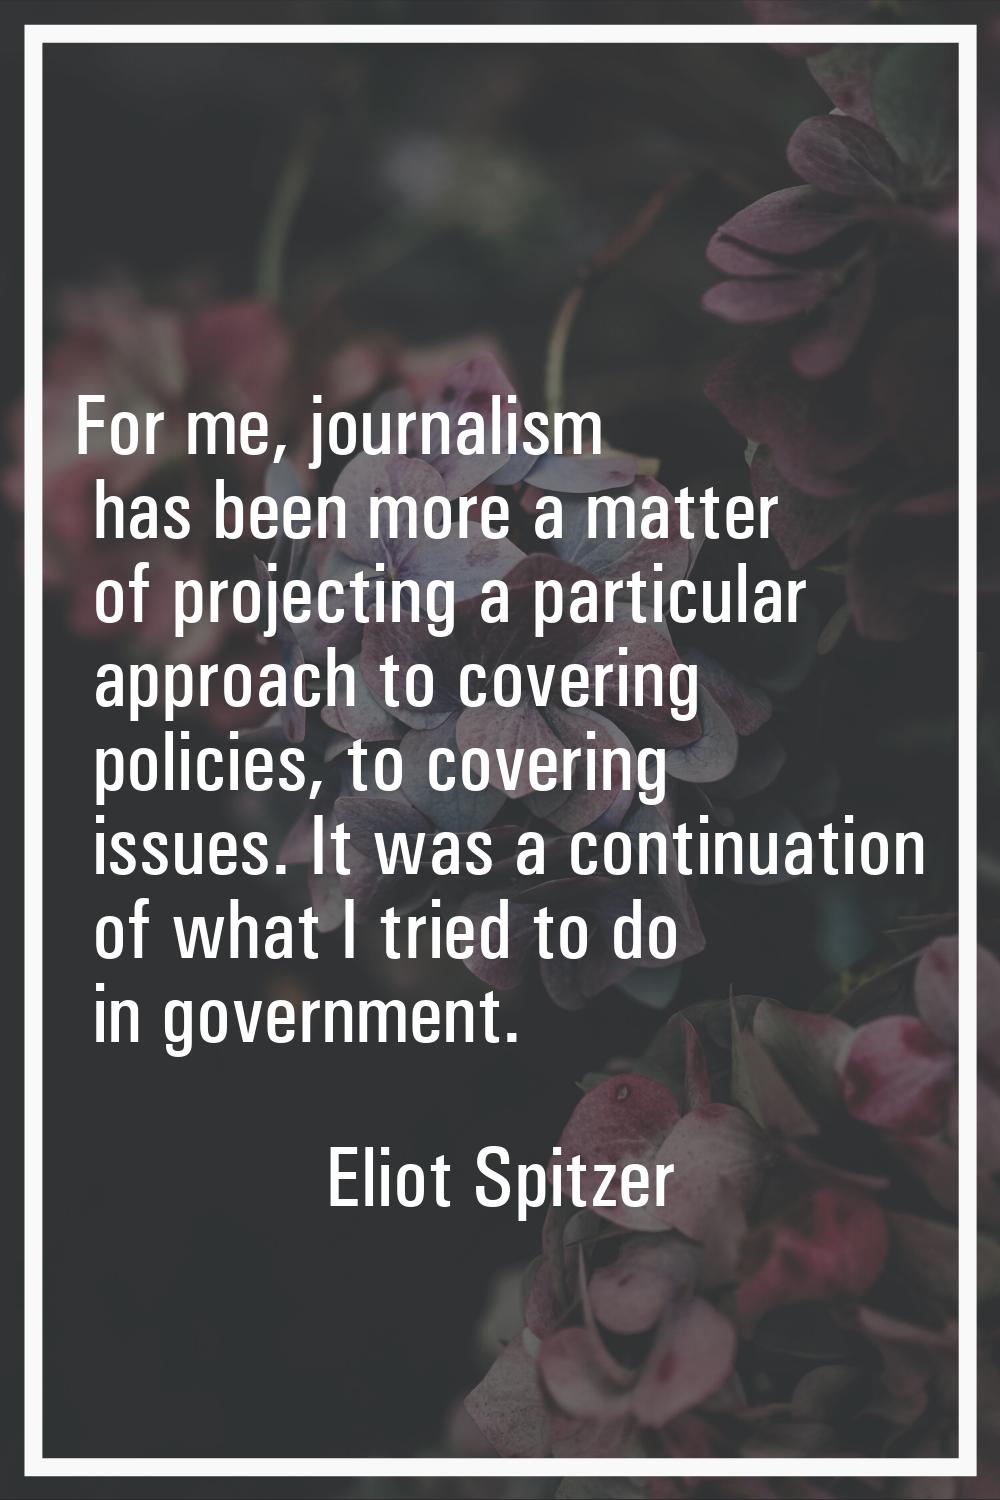 For me, journalism has been more a matter of projecting a particular approach to covering policies,